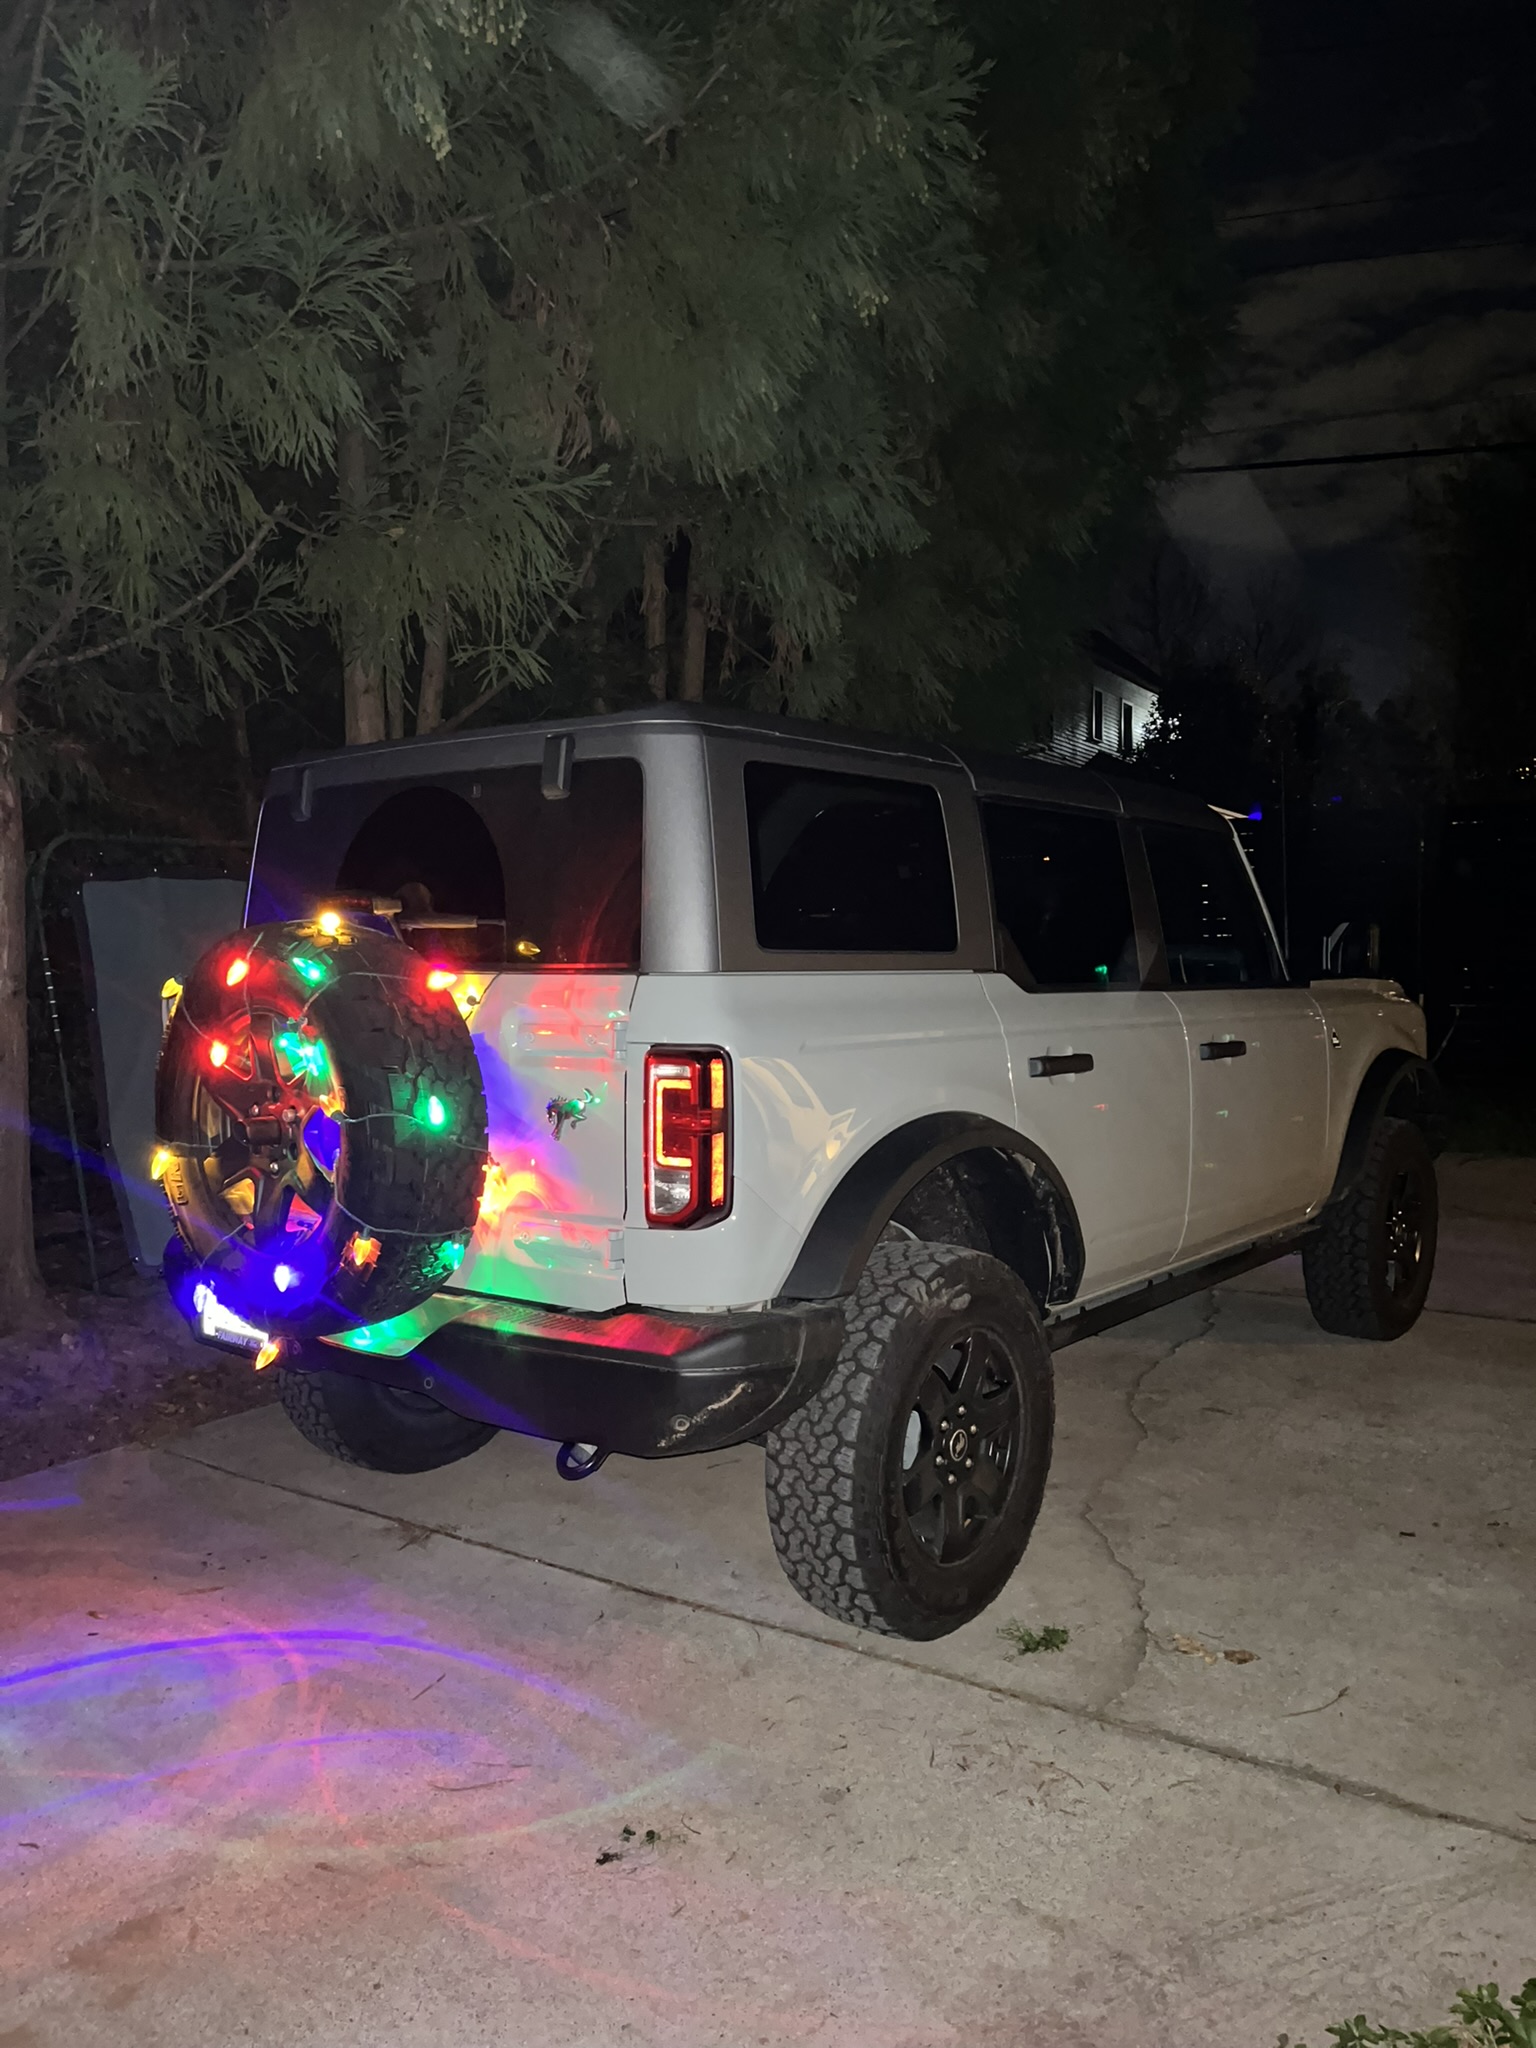 Ford Bronco How are you decorating your Bronco for Christmas or holidays? Post yours! 🎅 1084C486-0859-44AC-A182-ABCCF7E95CA3